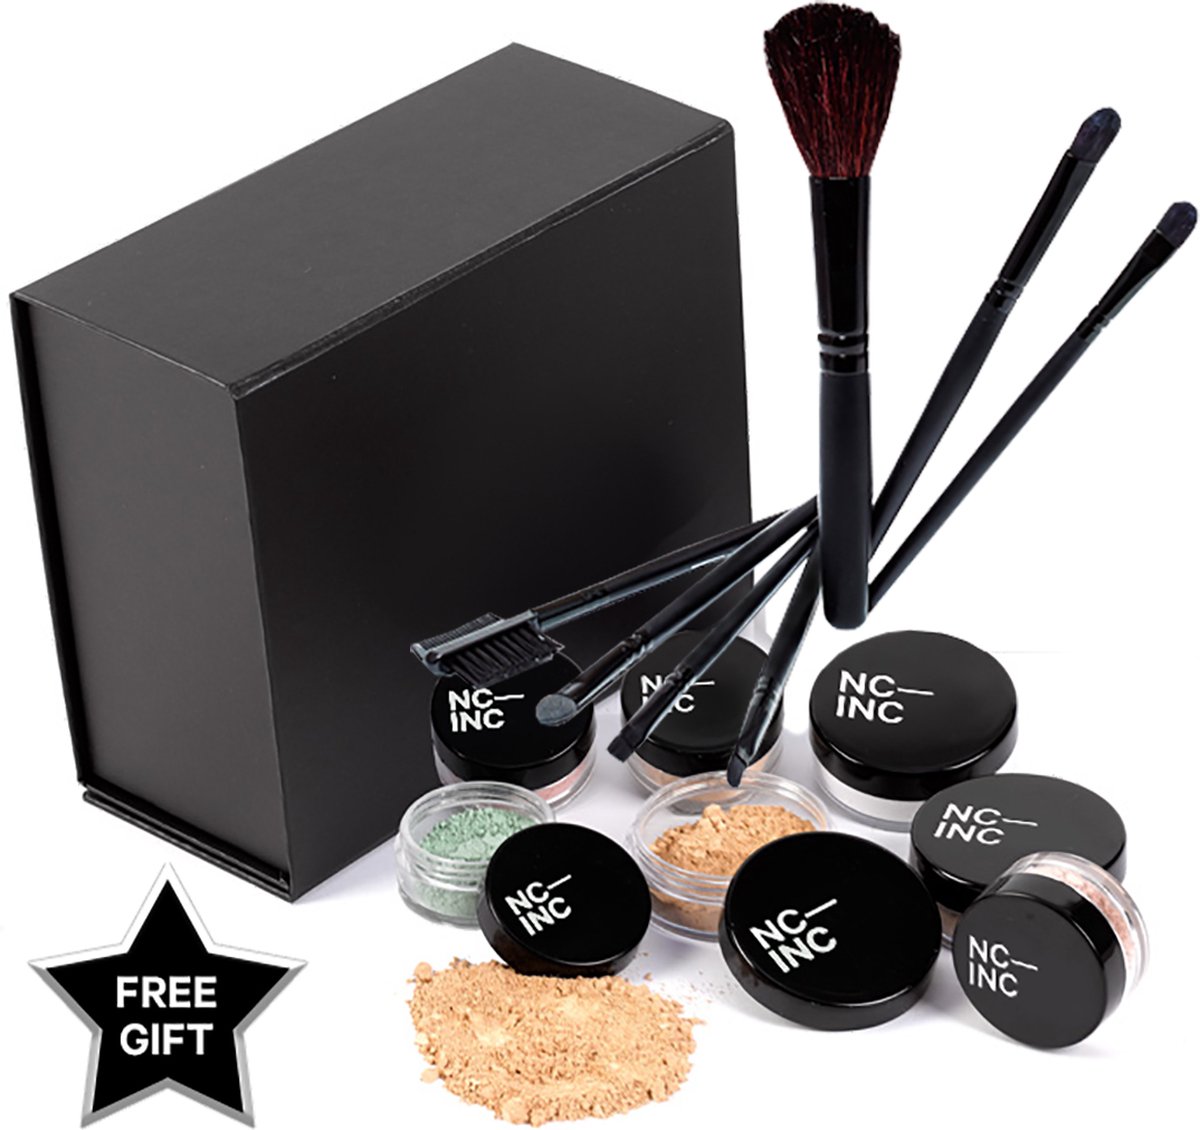 Nc-Inc minerale make-up luxe giftset TANNED